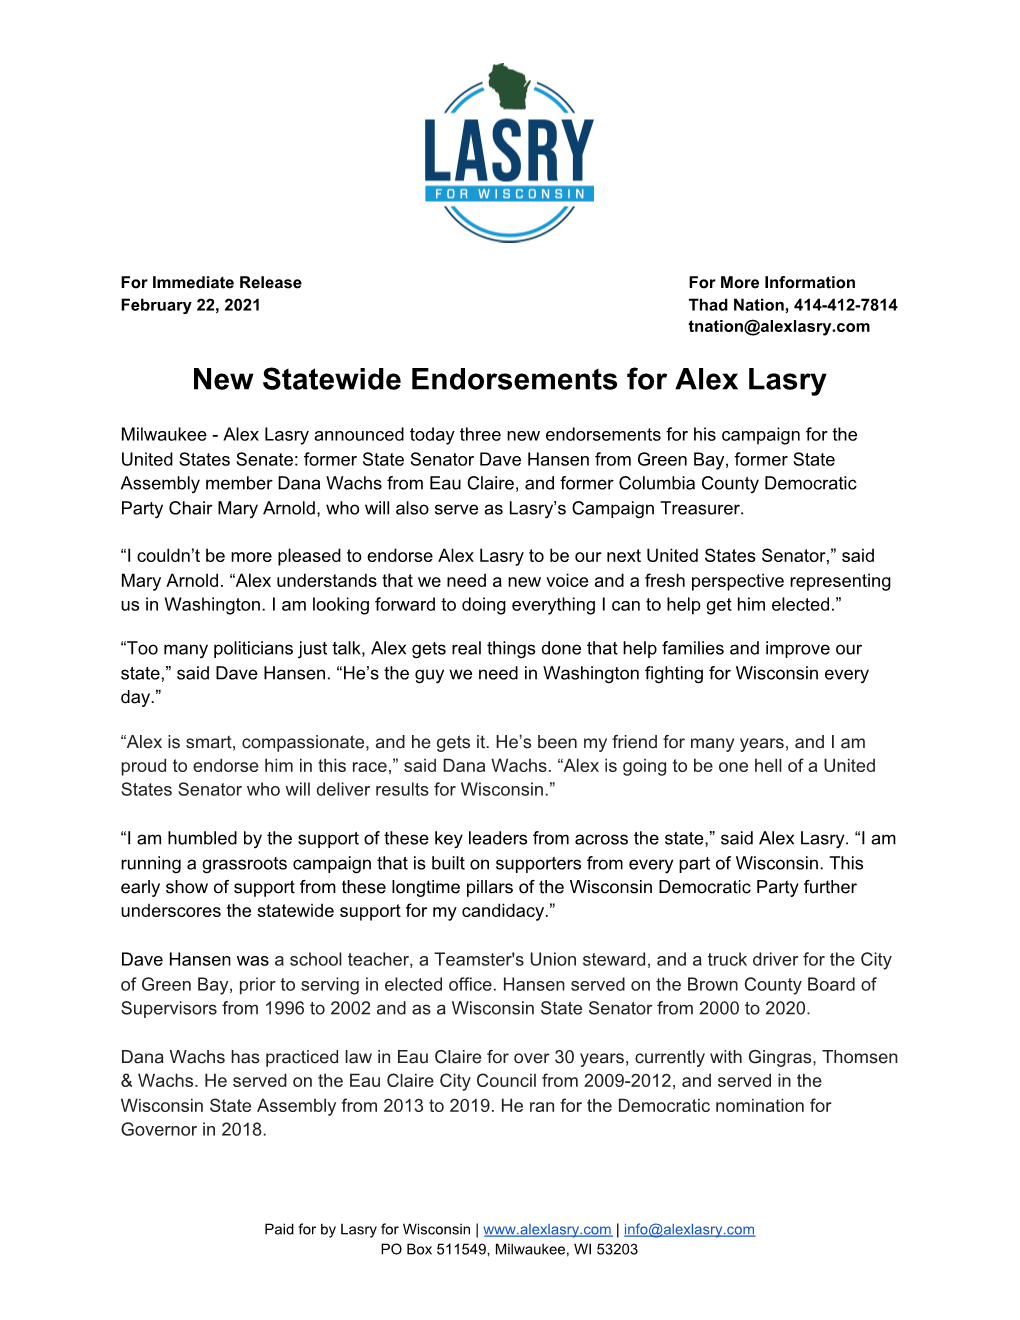 New Statewide Endorsements for Alex Lasry